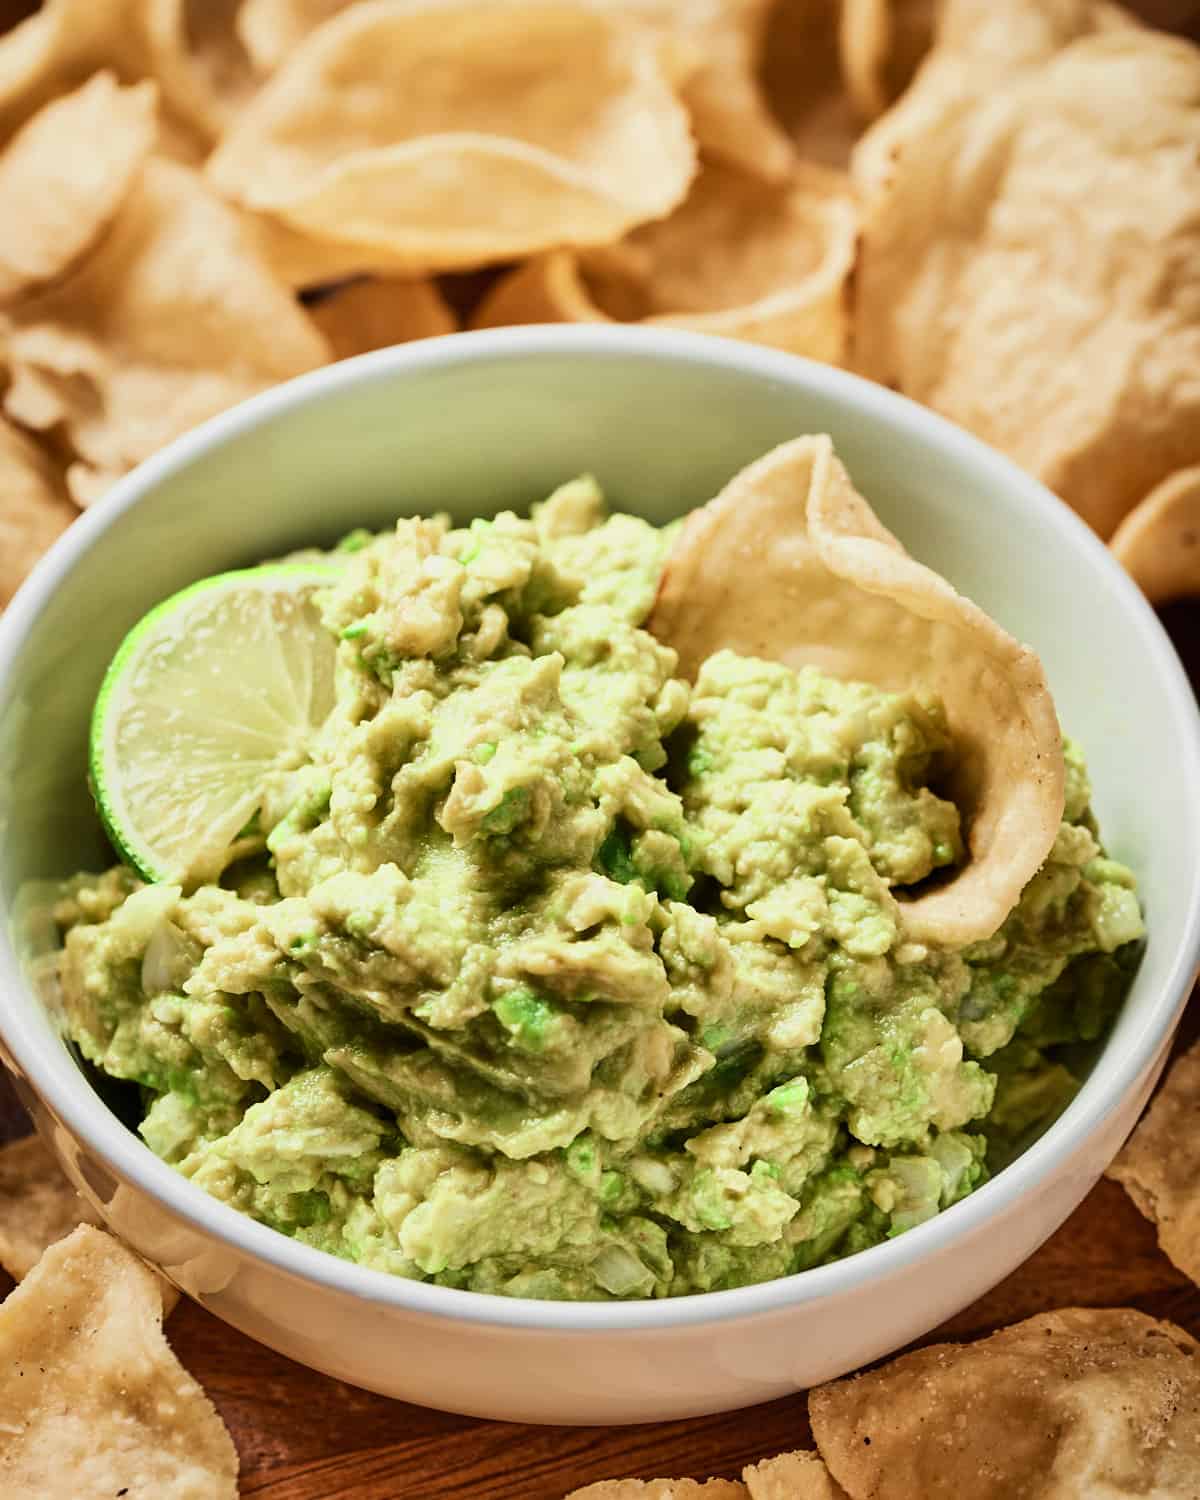 Top down view of 4 ingredient guacamole in white bowl with tortilla chips